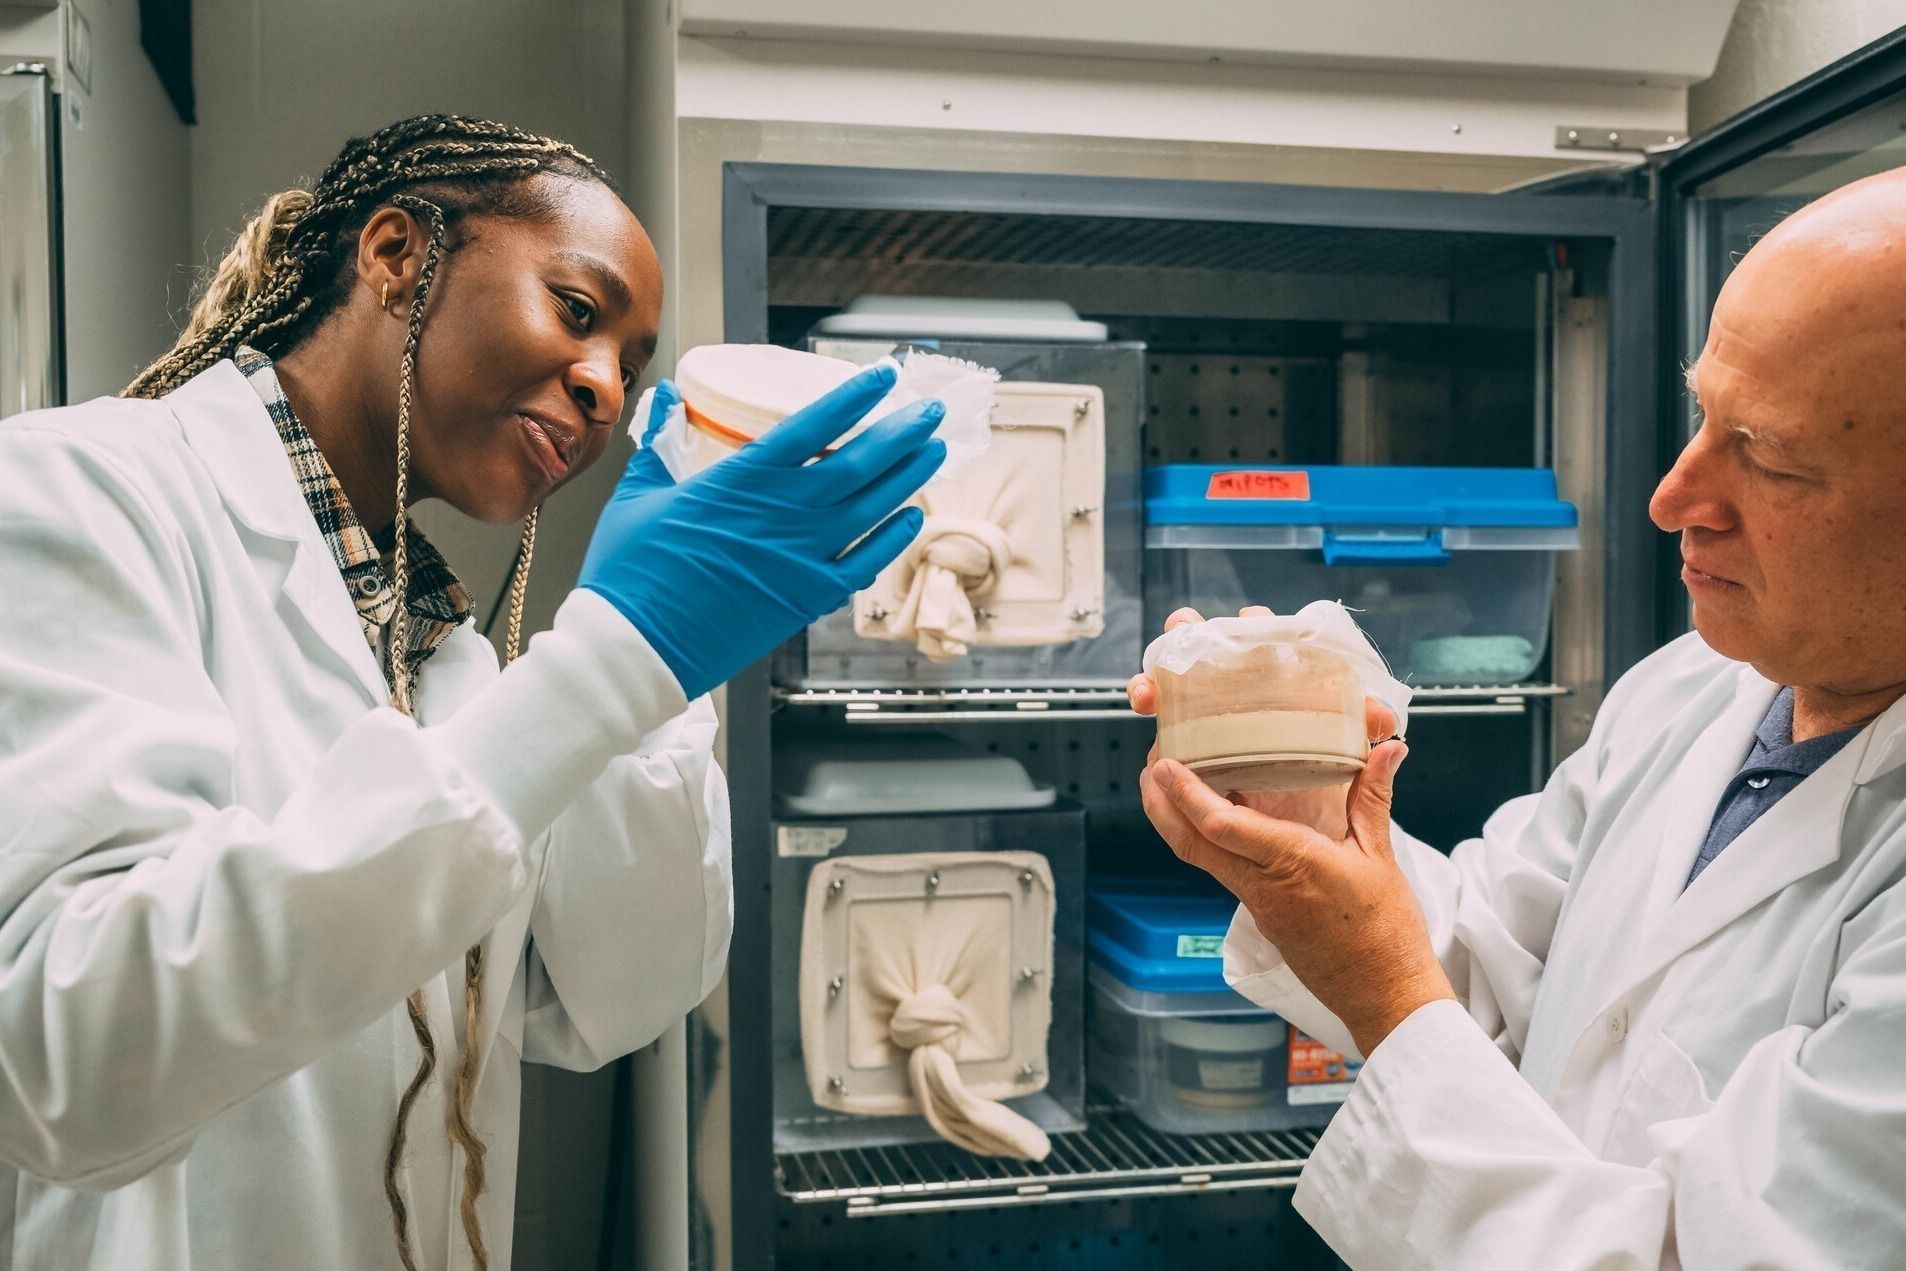 Chelsea Akabueze and Wasserberg looking at small colonies of flies